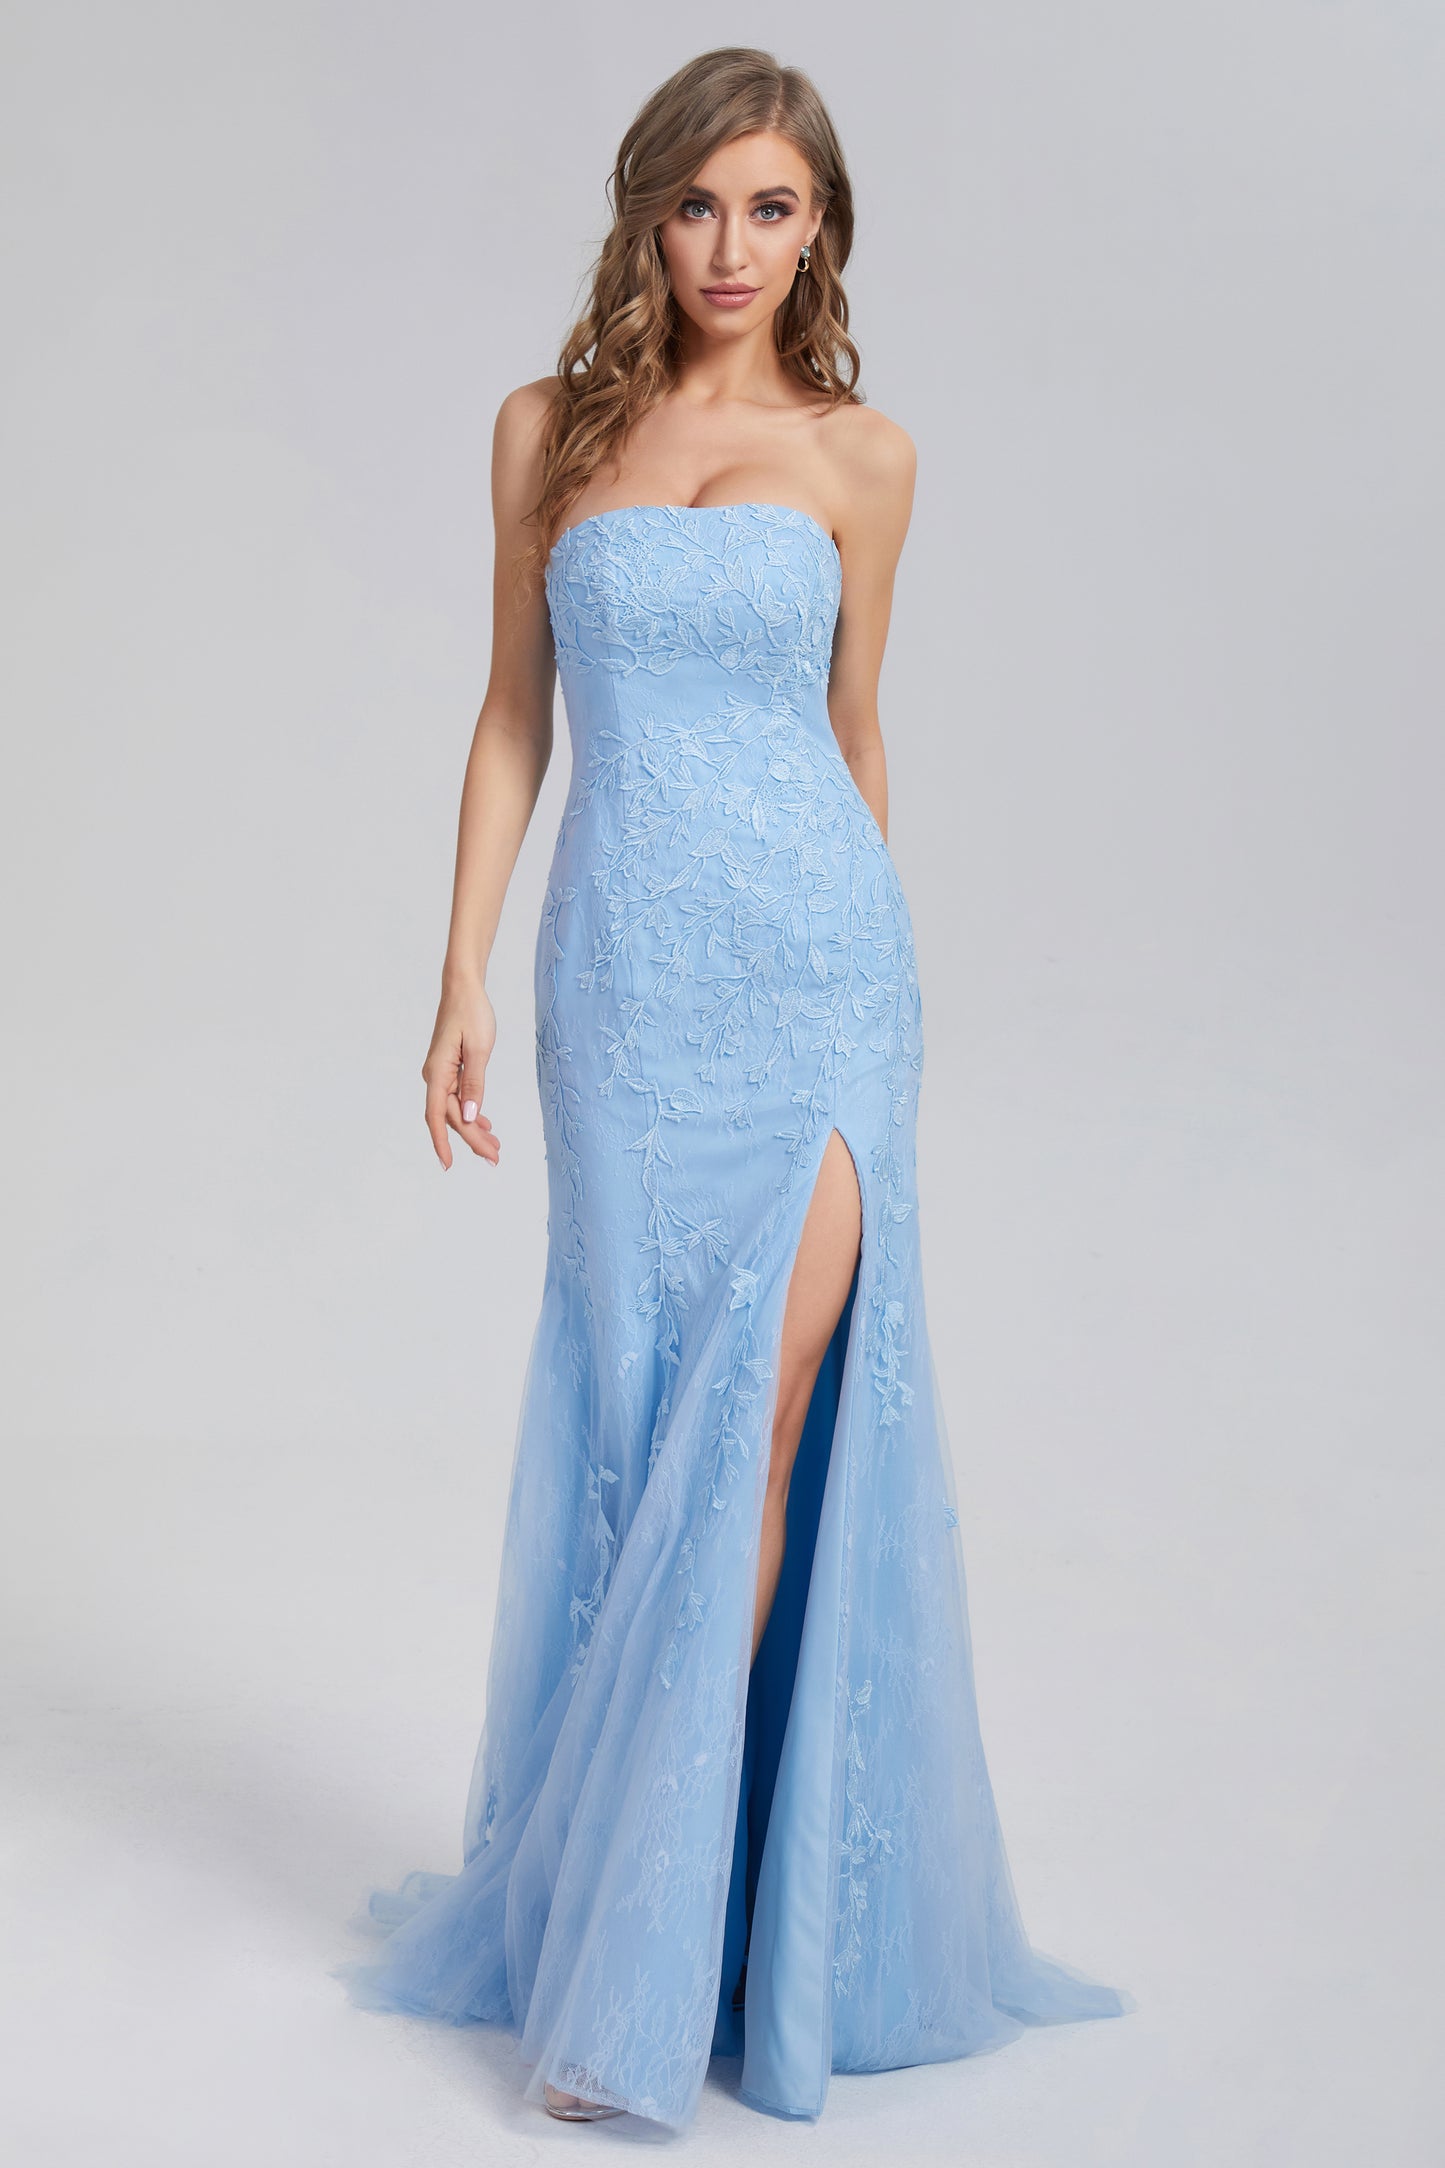 Mermaid Strapless Appliques Lace Prom Dresses